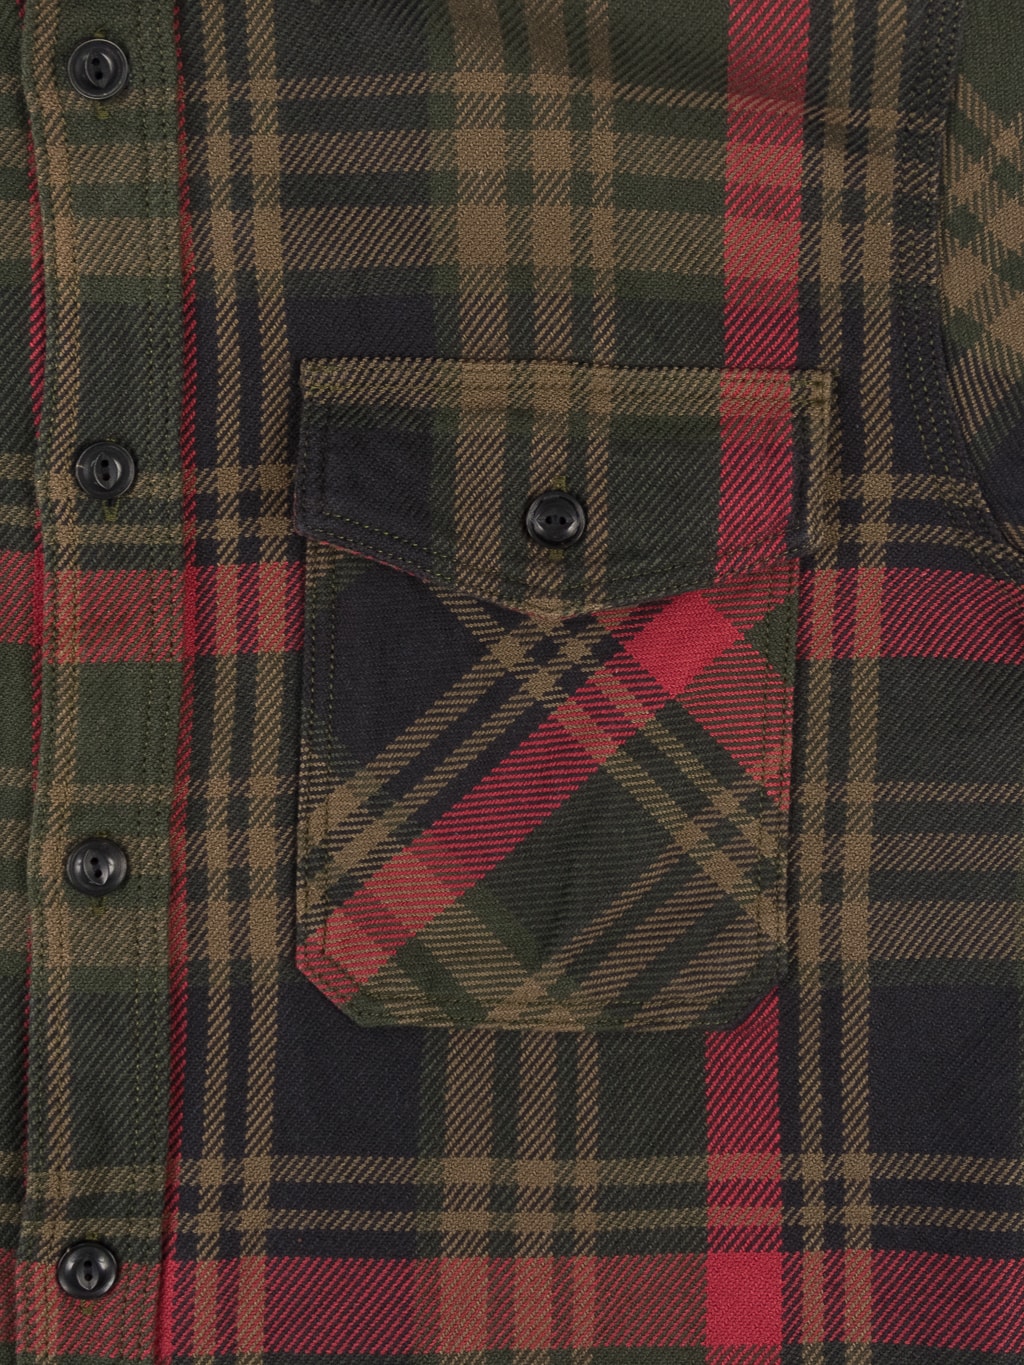 ues extra heavy selvedge flannel shirt red pocket closeup